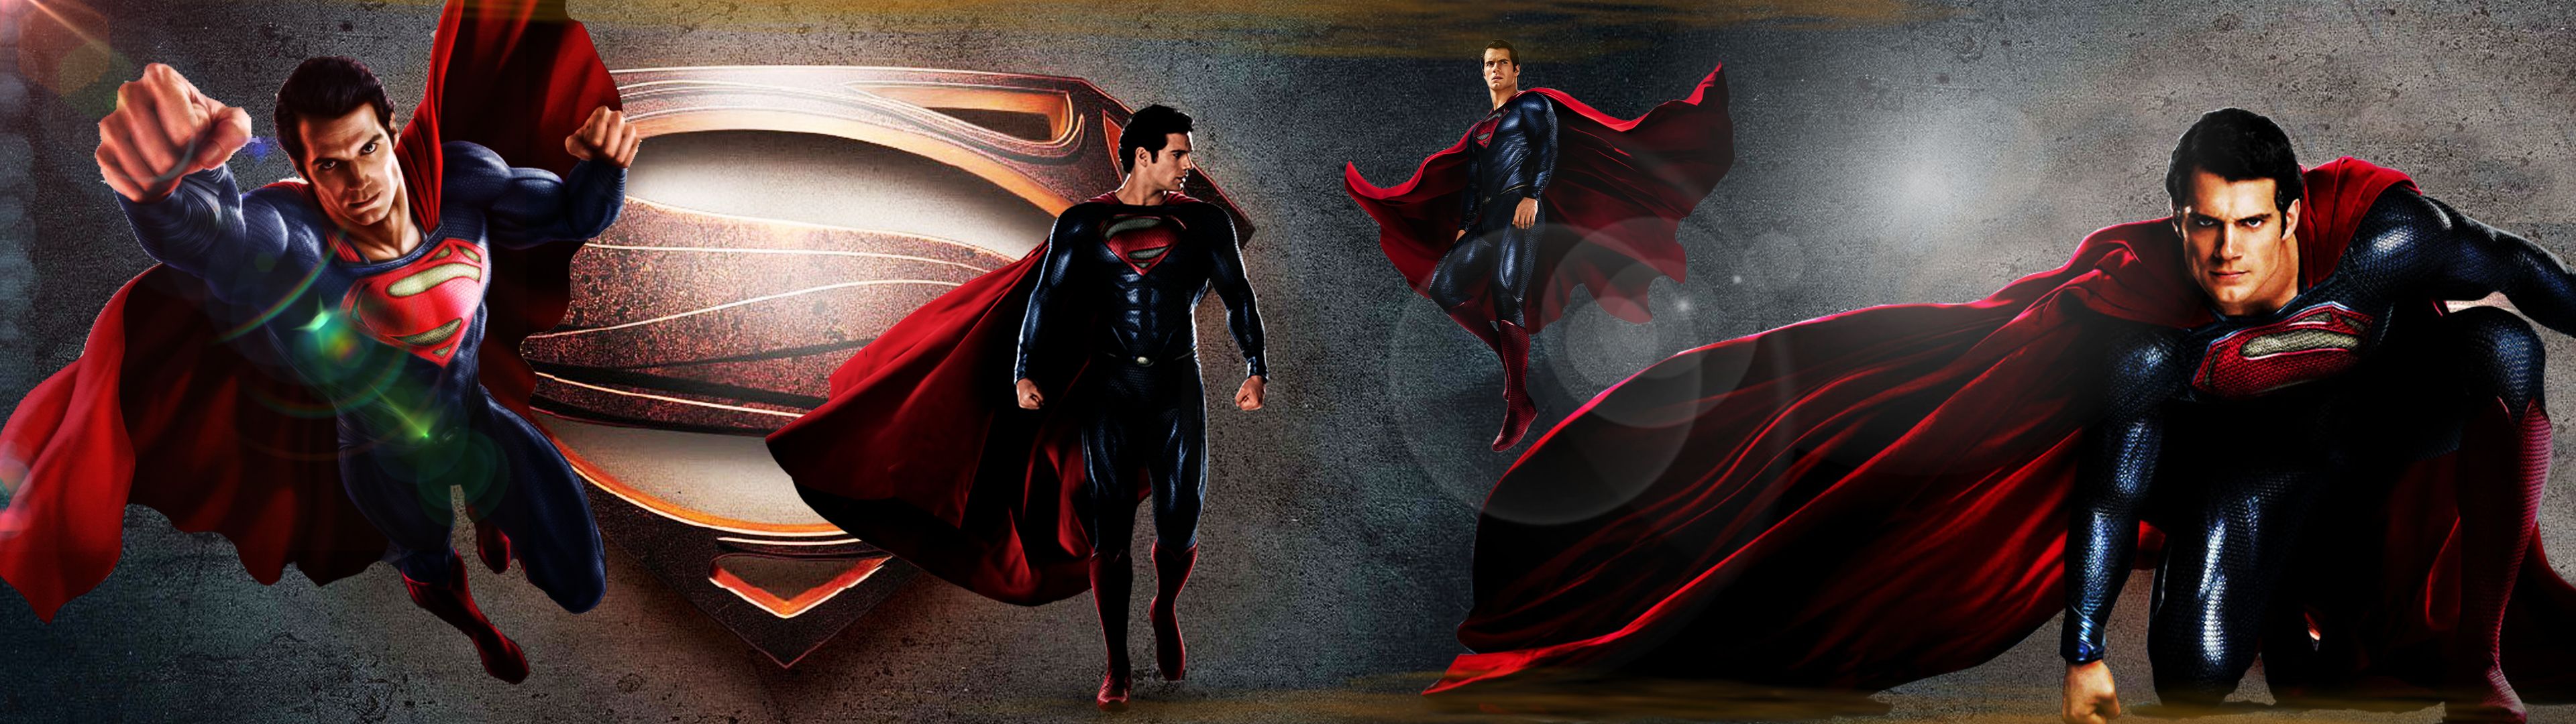 Henry Cavill wallpaper by tigereg74  Download on ZEDGE  796e